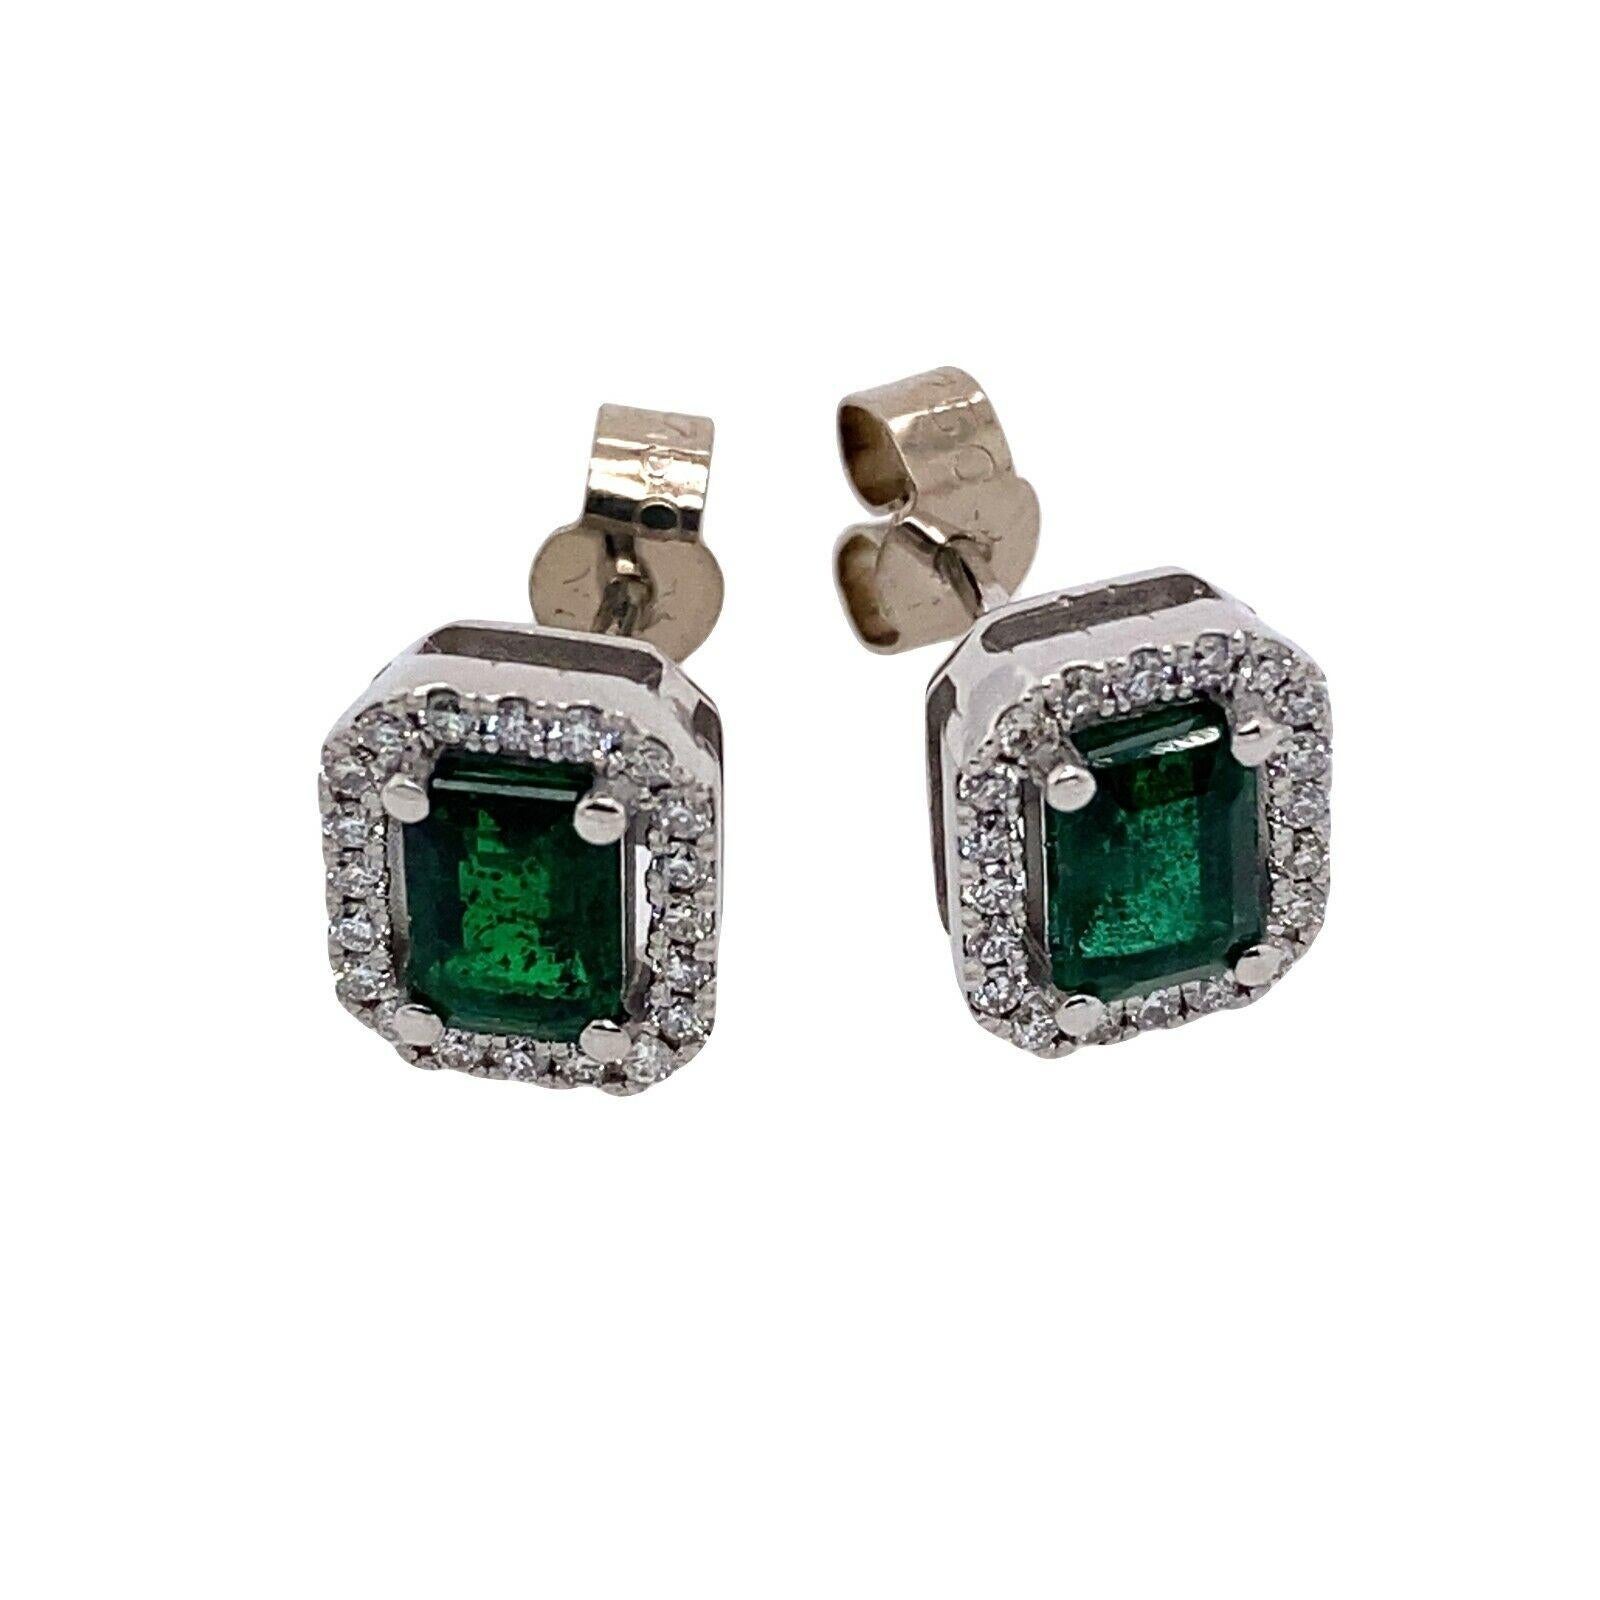 New Emerald Cut Zambian Emeralds, Surrounded by Diamonds, Set In 18ct White GoldWith 0.35ct of Diamondsand 1.45ct of emeraldsWith Peg & Screw FittingsMade by Jewellery Cave.

Additional Information:
Total Diamond Weight: 0.35ct 
Diamond Colour: